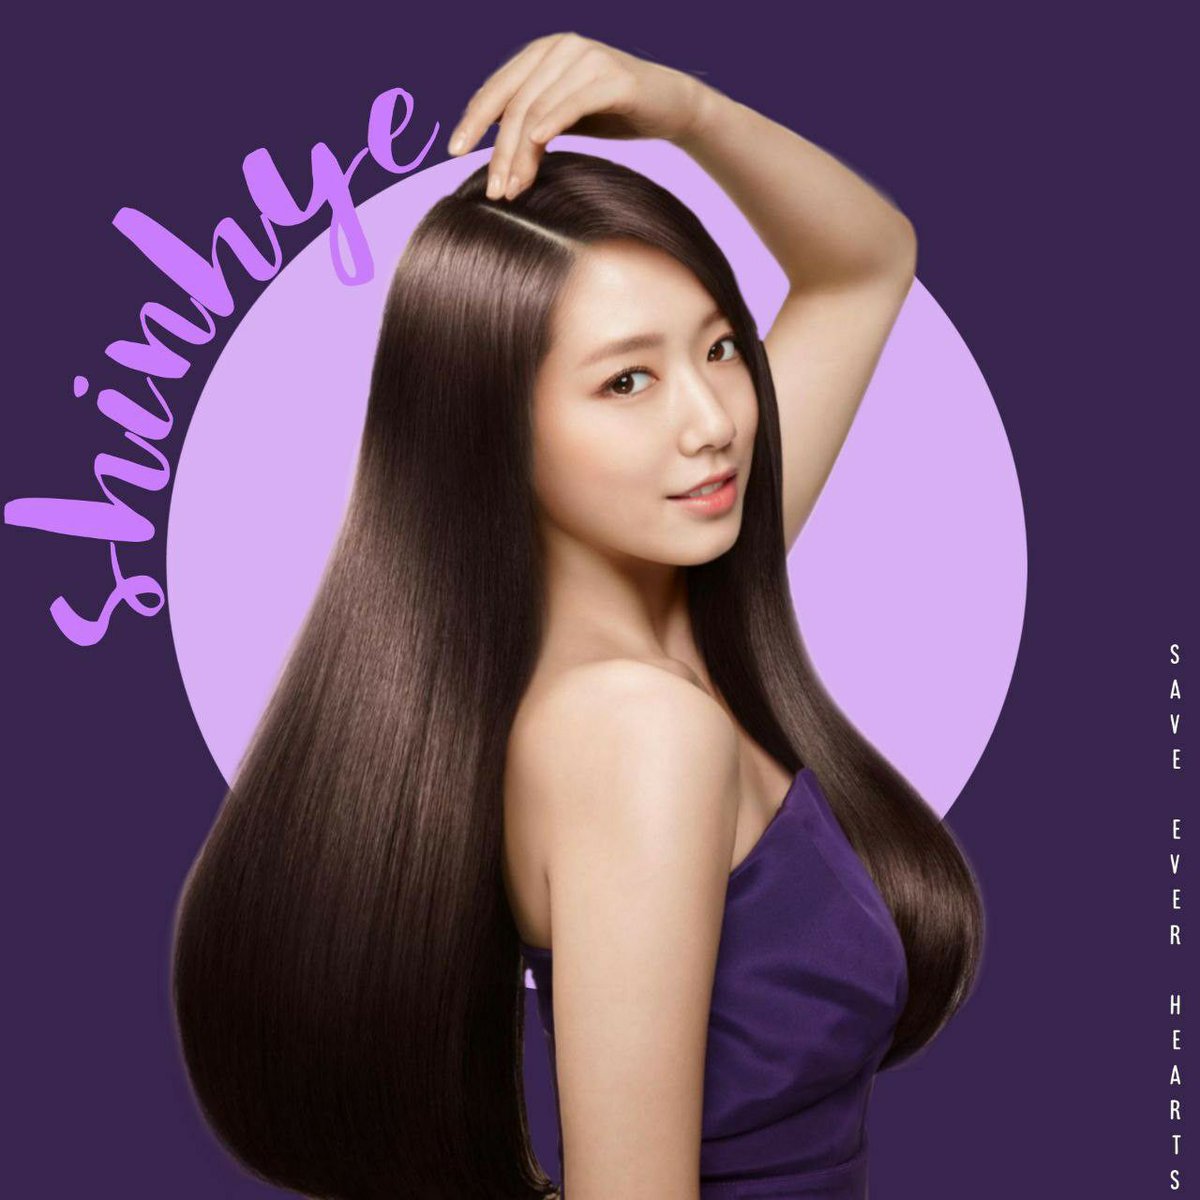 A Thread - Celebrities opinion about Park shinhye  #Parkshinhye